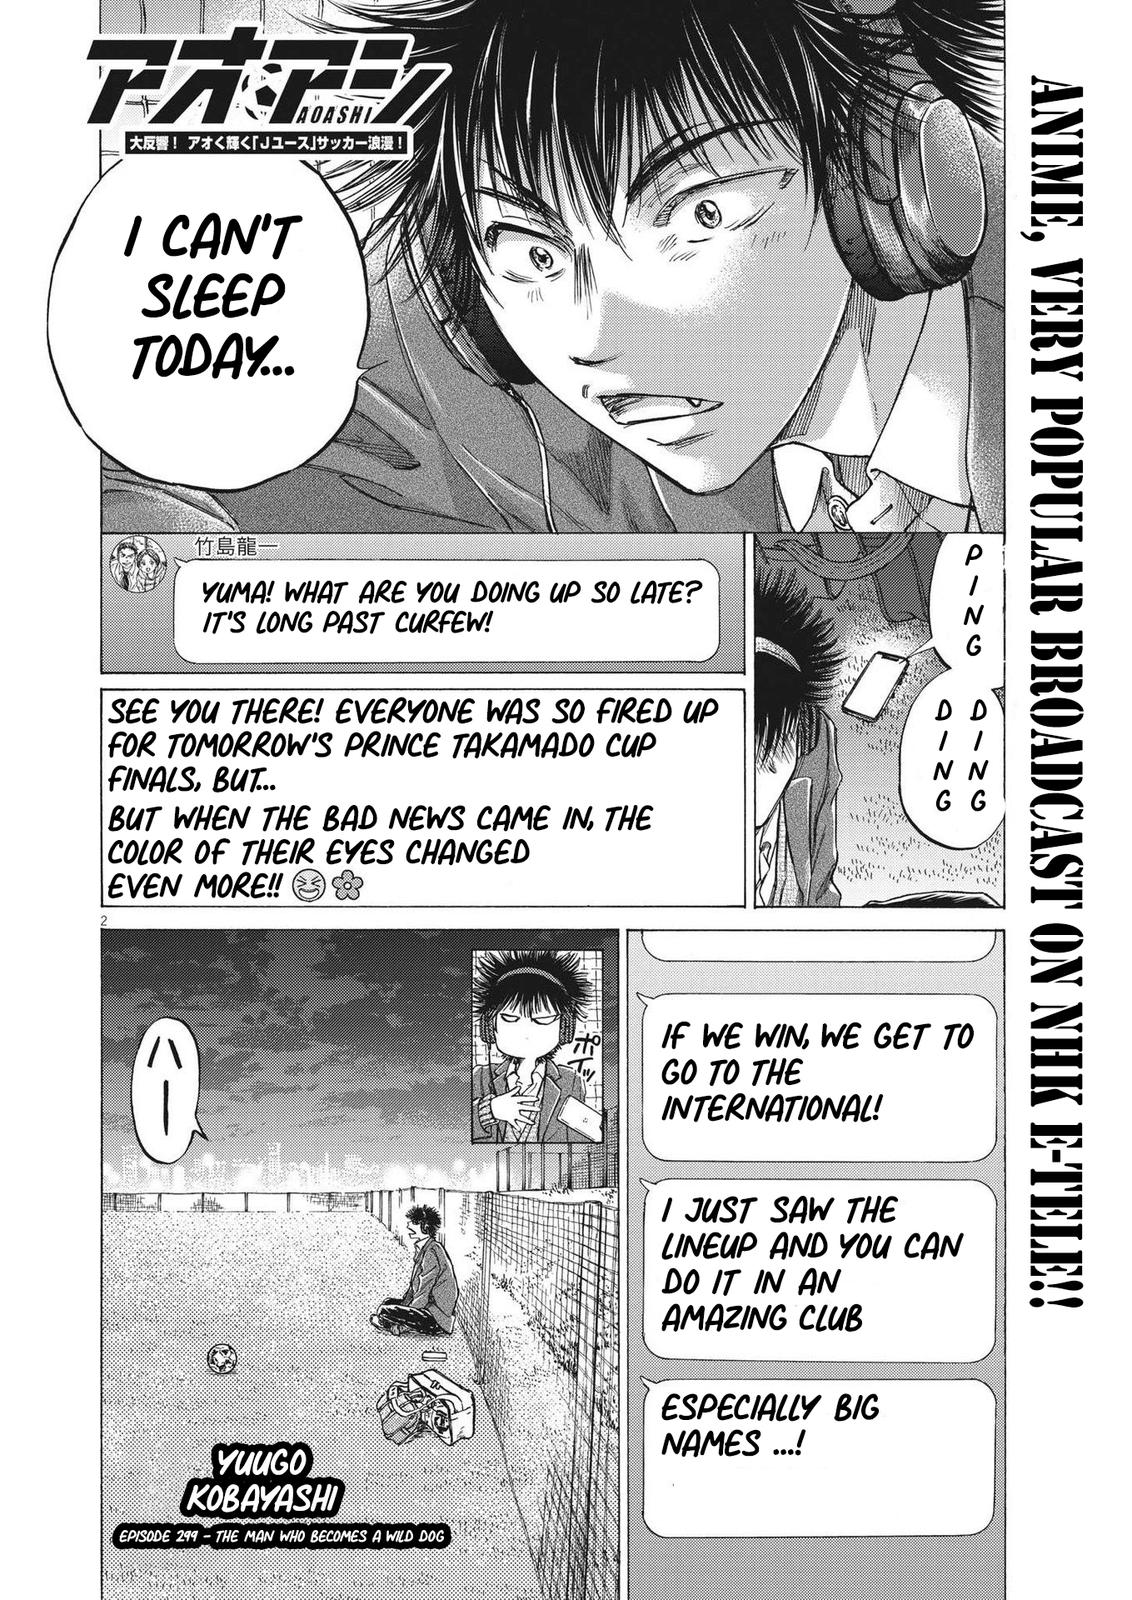 Ao Ashi, Chapter 234  TcbScans Net - TCBscans - Free Manga Online in High  Quality